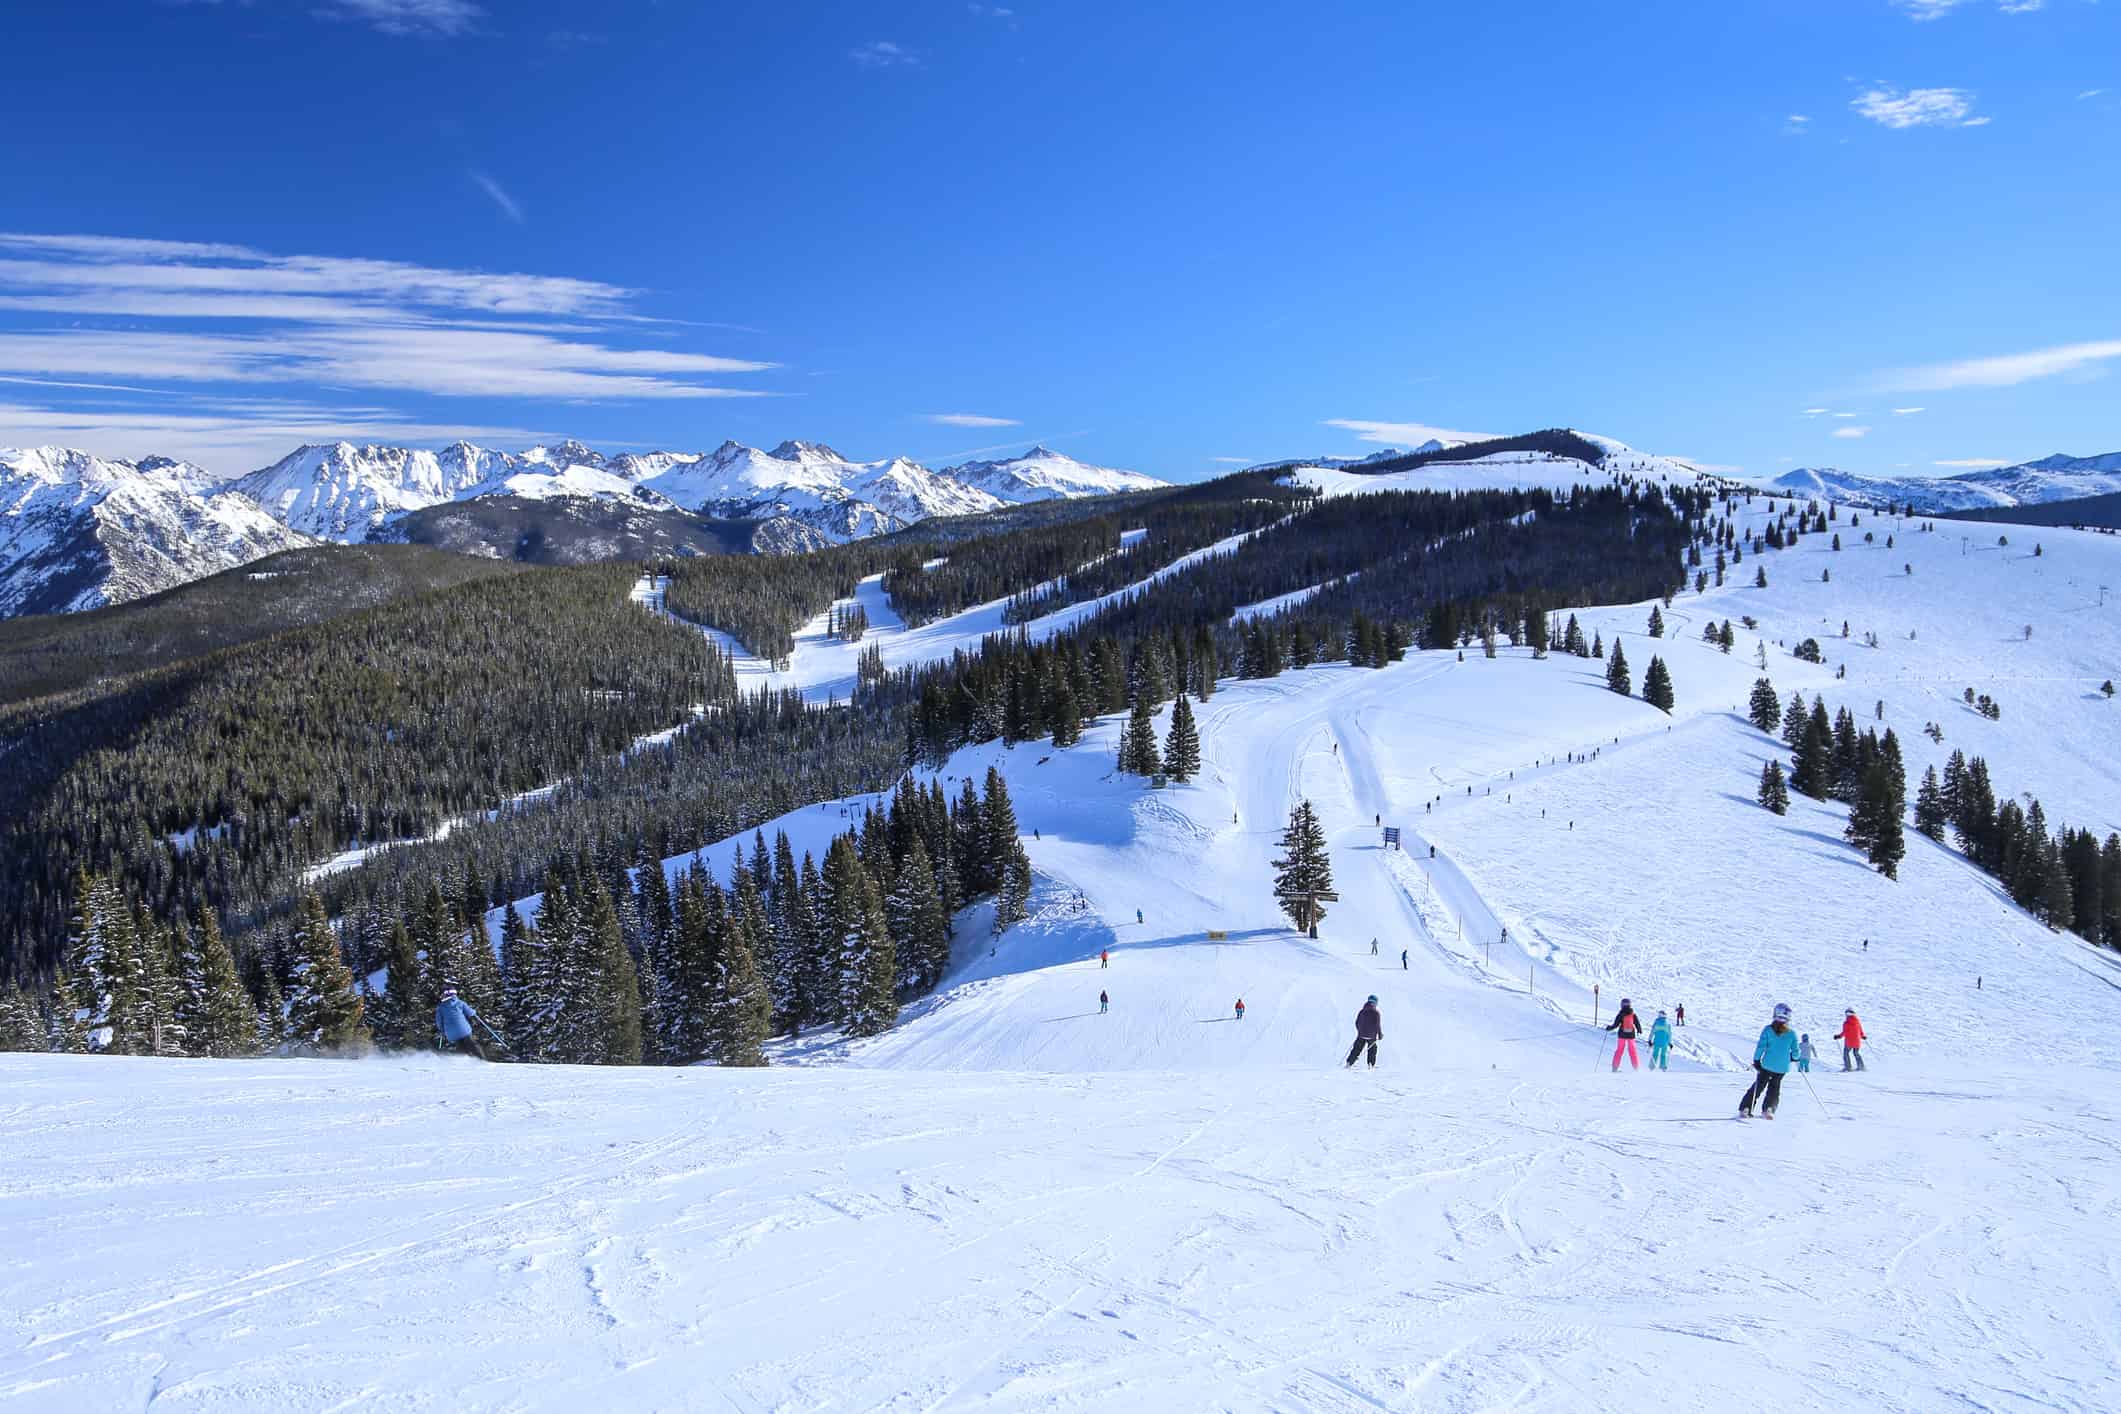 Vail ski resort is one of the largest ski resorts in the United States